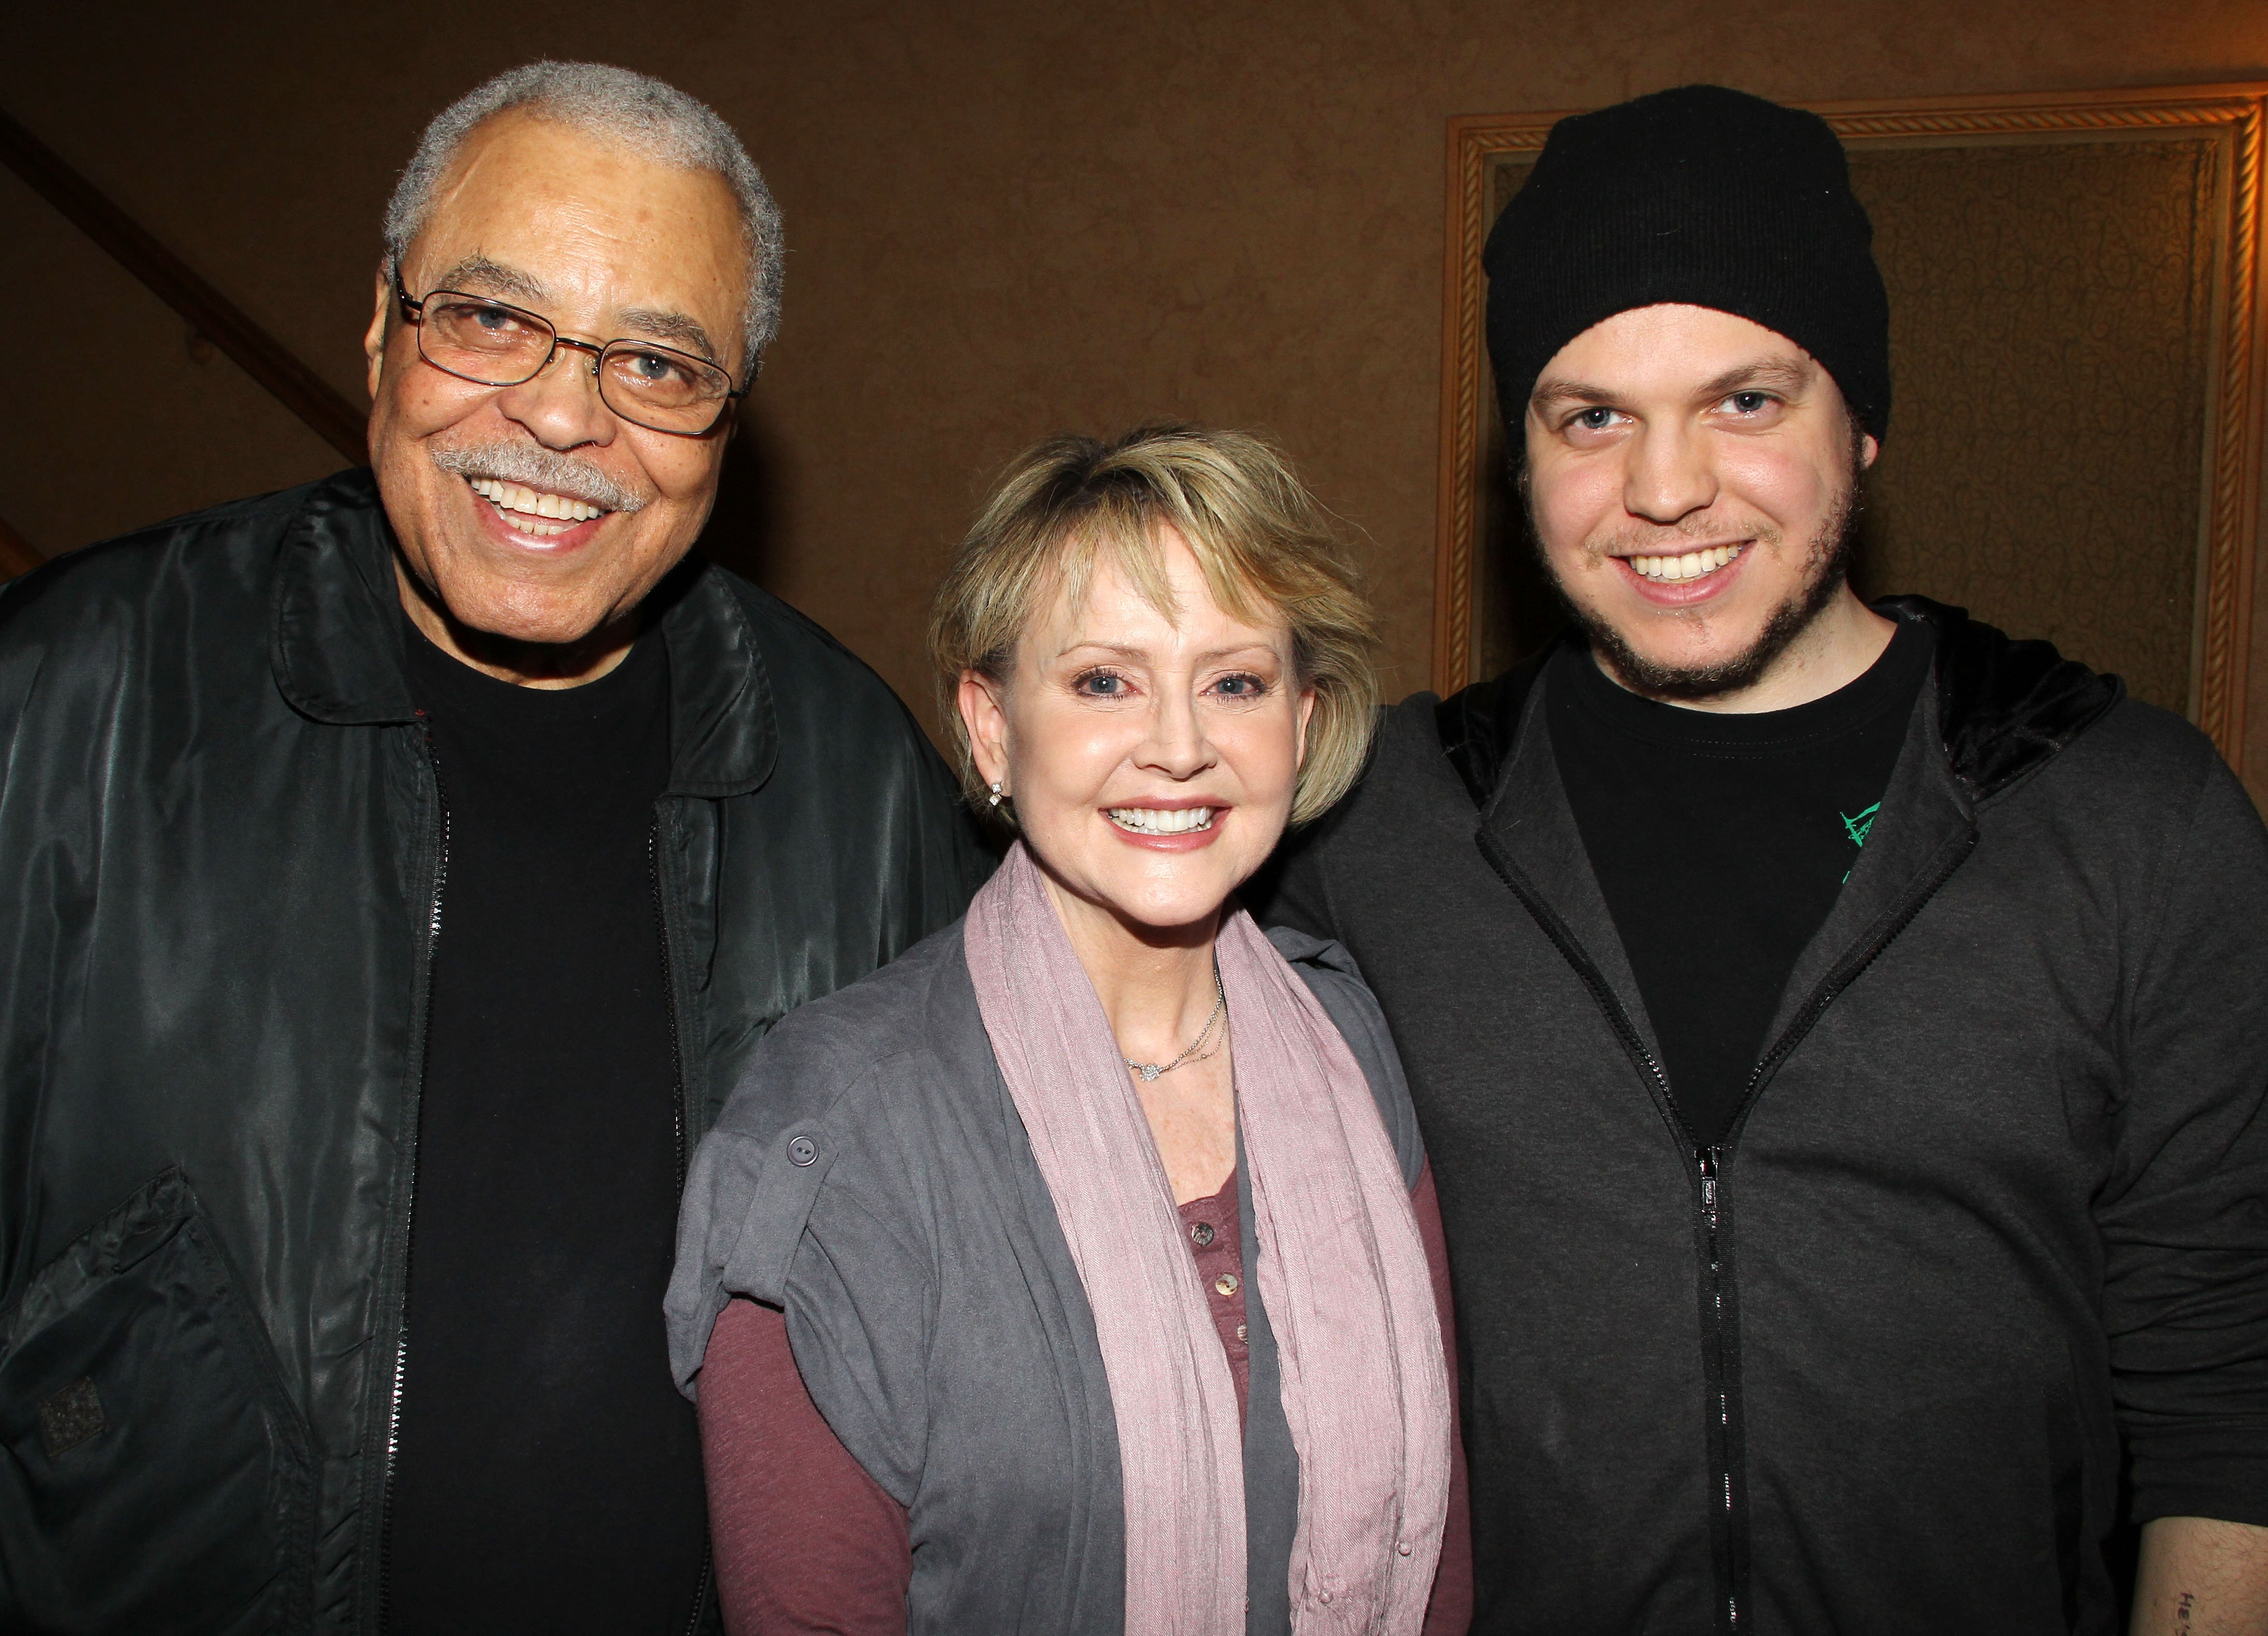 James Earl Jones, Cecilia Hart, and Flynn Earl Jones on the closing night of the play "Driving Miss Daisy" on Broadway on April 9, 2011, in New York City. | Source: Getty Images